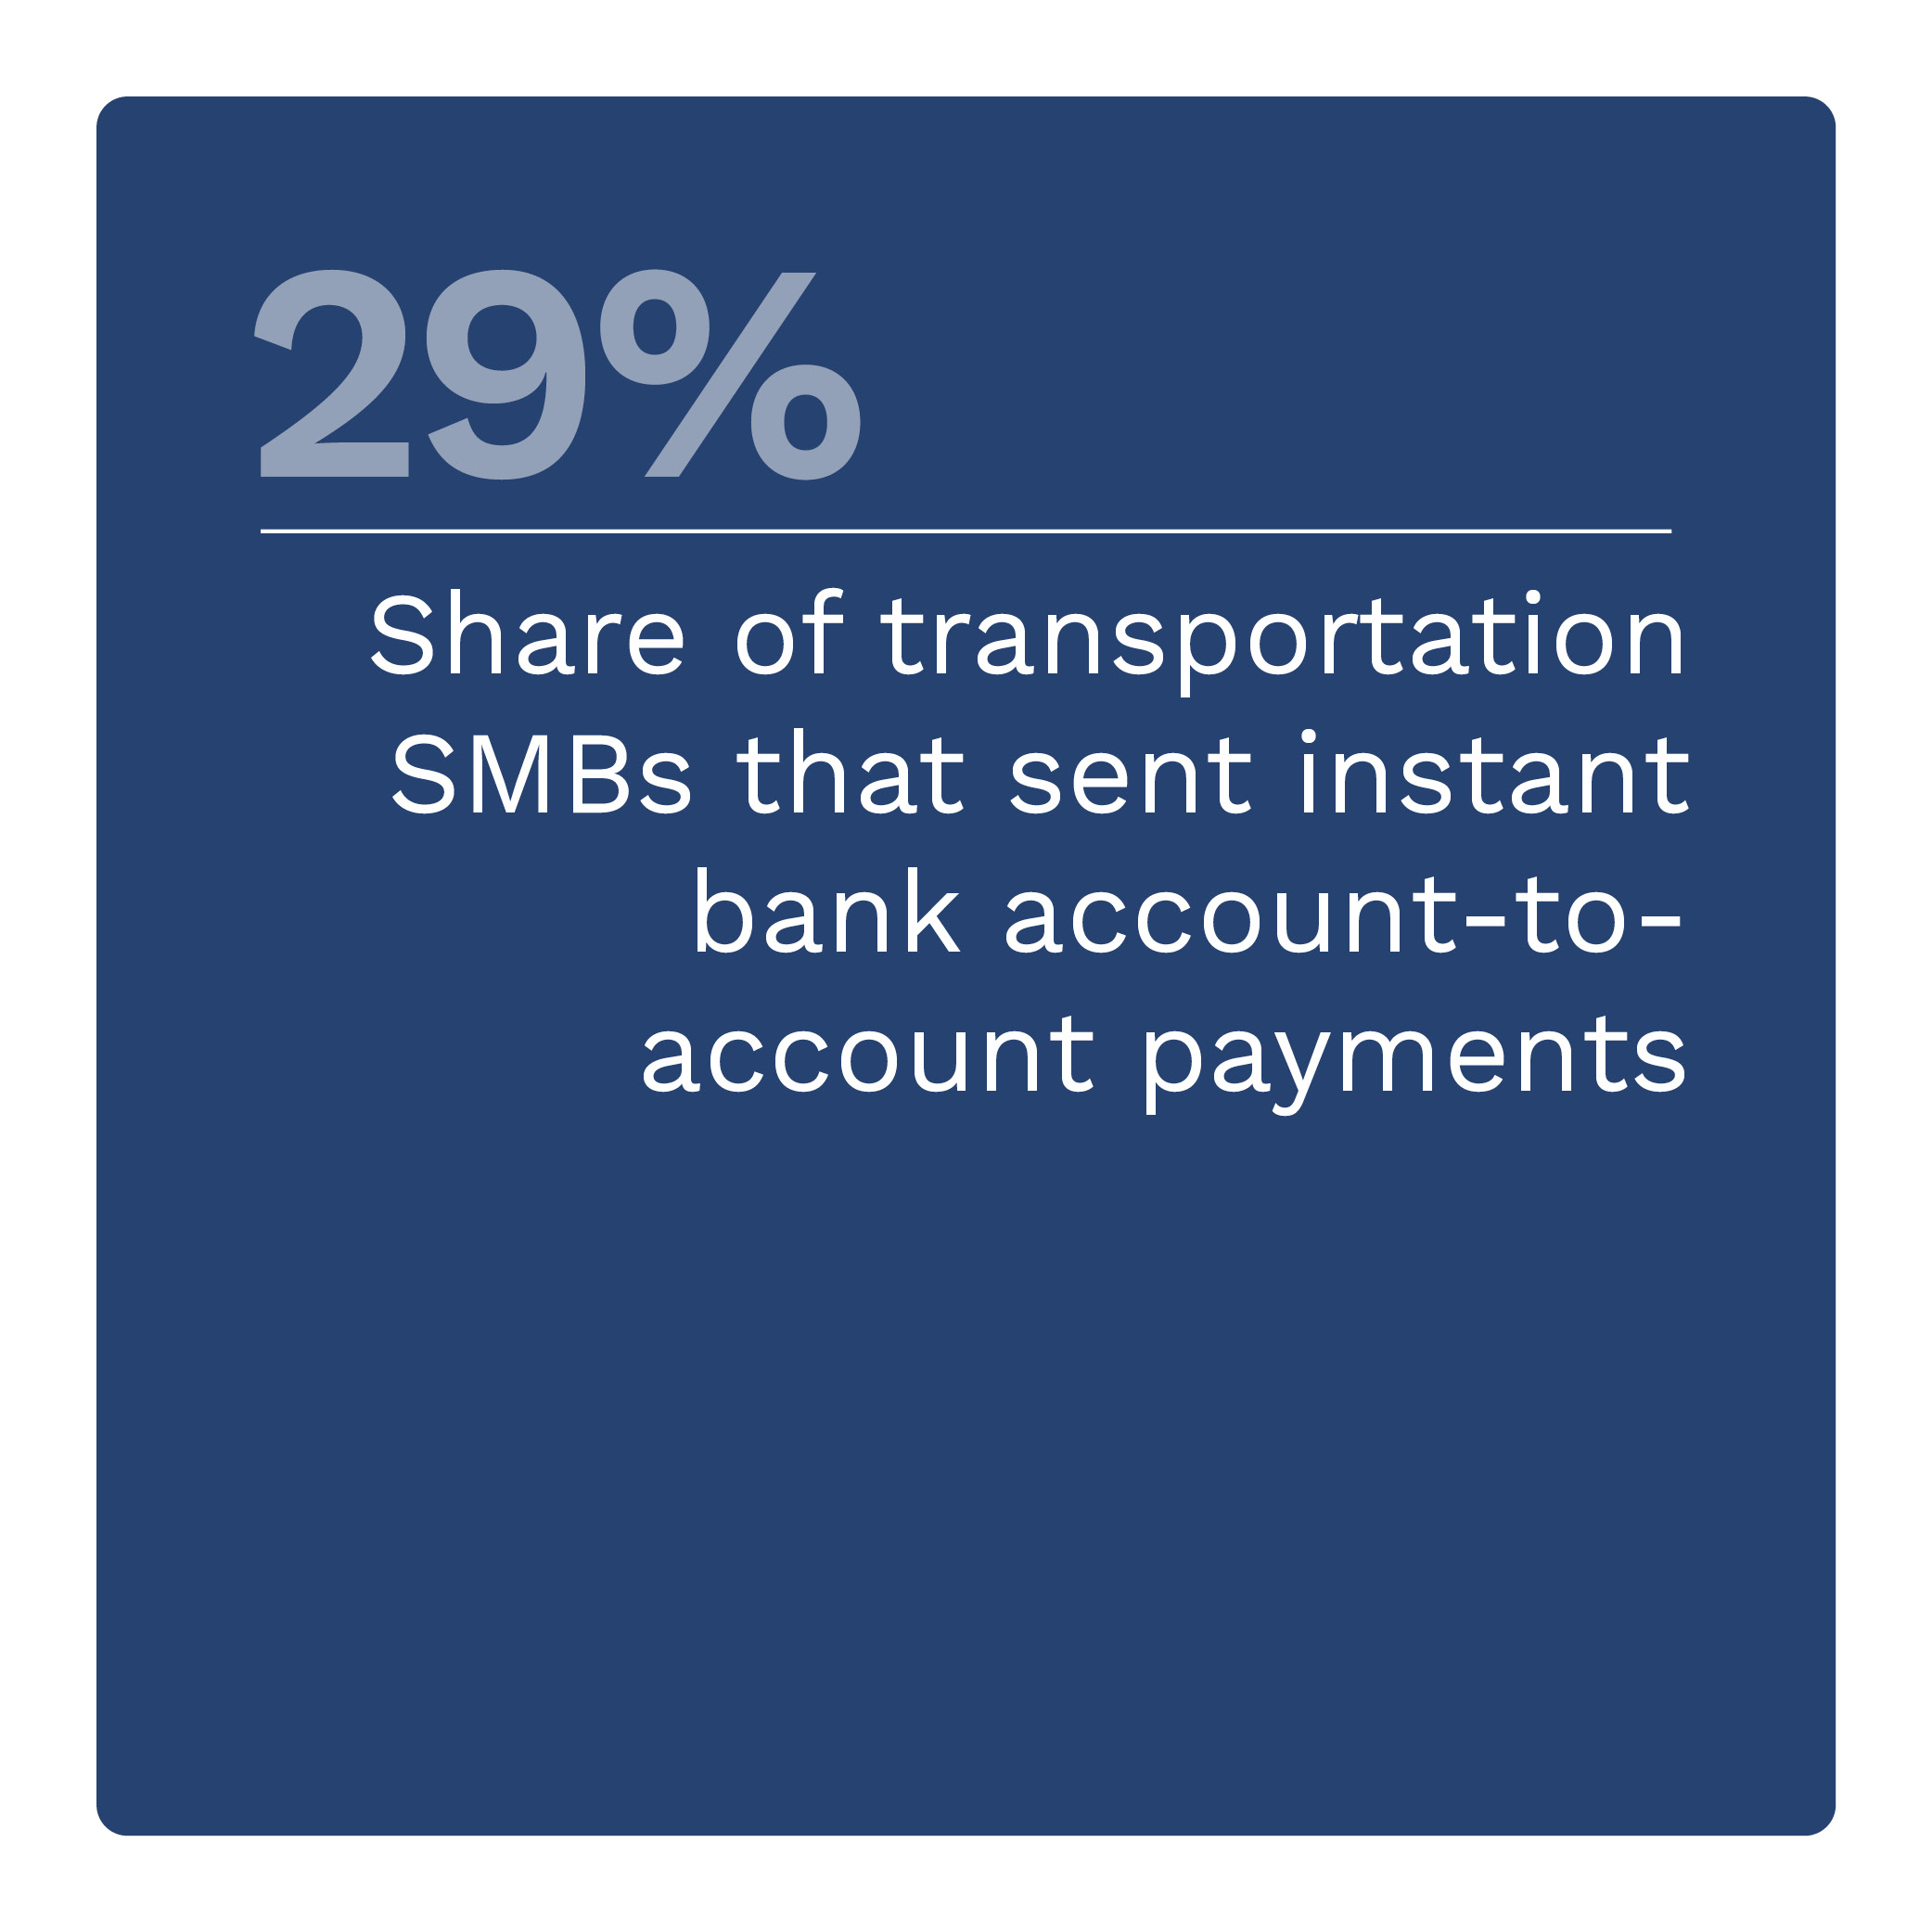 29%: Share of transportation SMBs that sent instant bank account-to-account payments